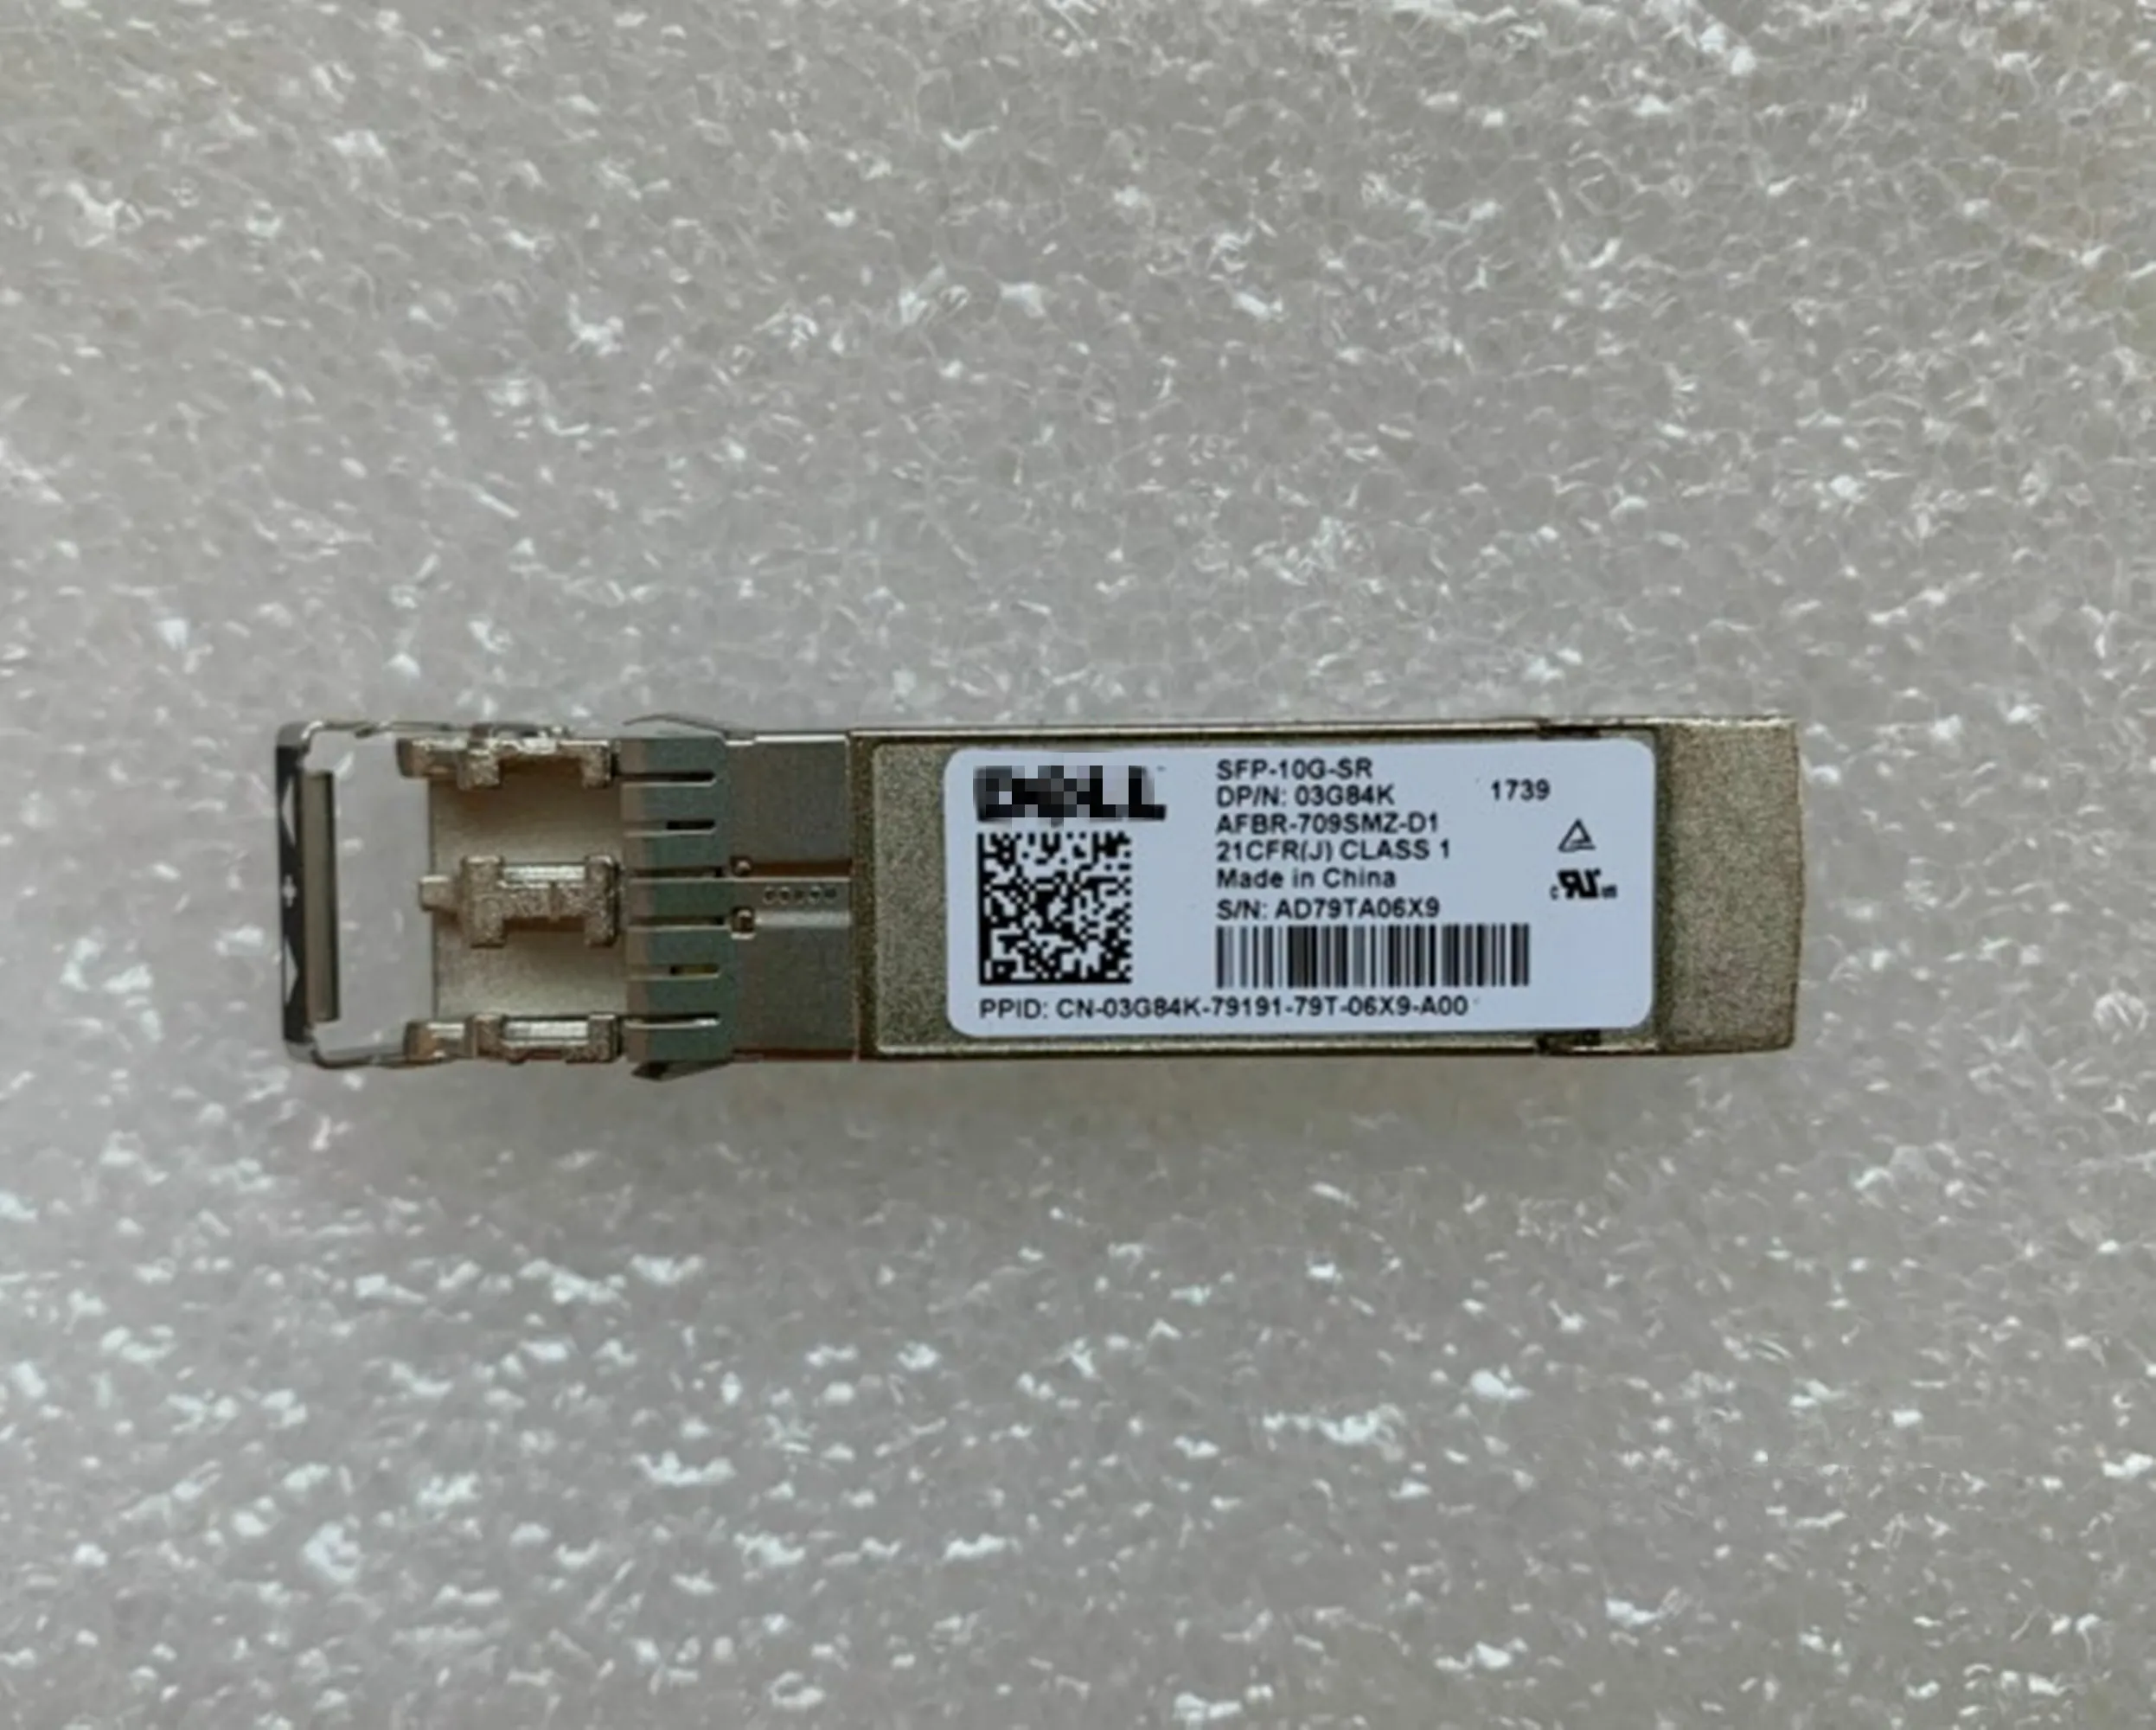 DELL SFP-10G-SR 03G84K AFBR-709SMZ-D1 10Gbase-SR 850nm 300m dell 10g sfpTransceiver/dell 10g switch switches network card module enlarge